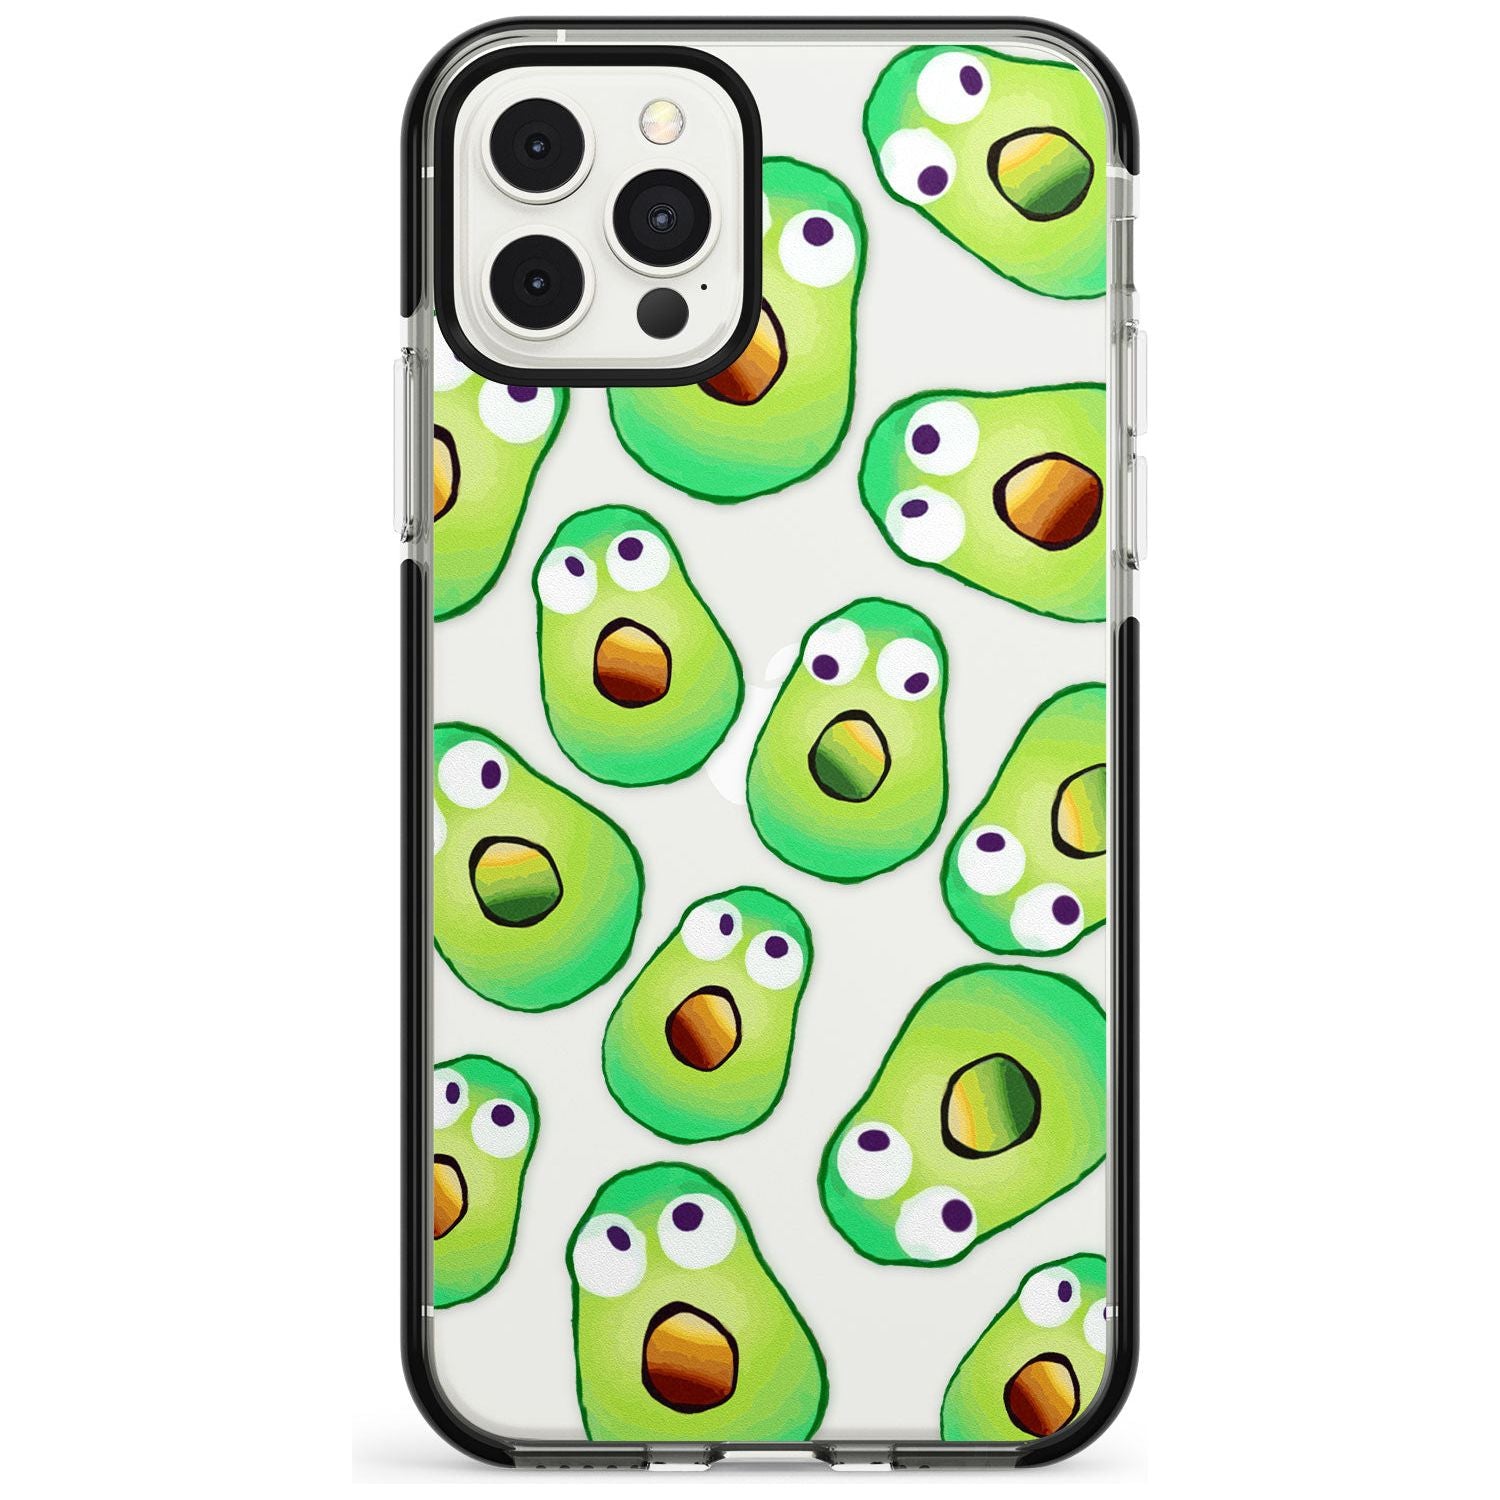 Shocked Avocados Black Impact Phone Case for iPhone 11